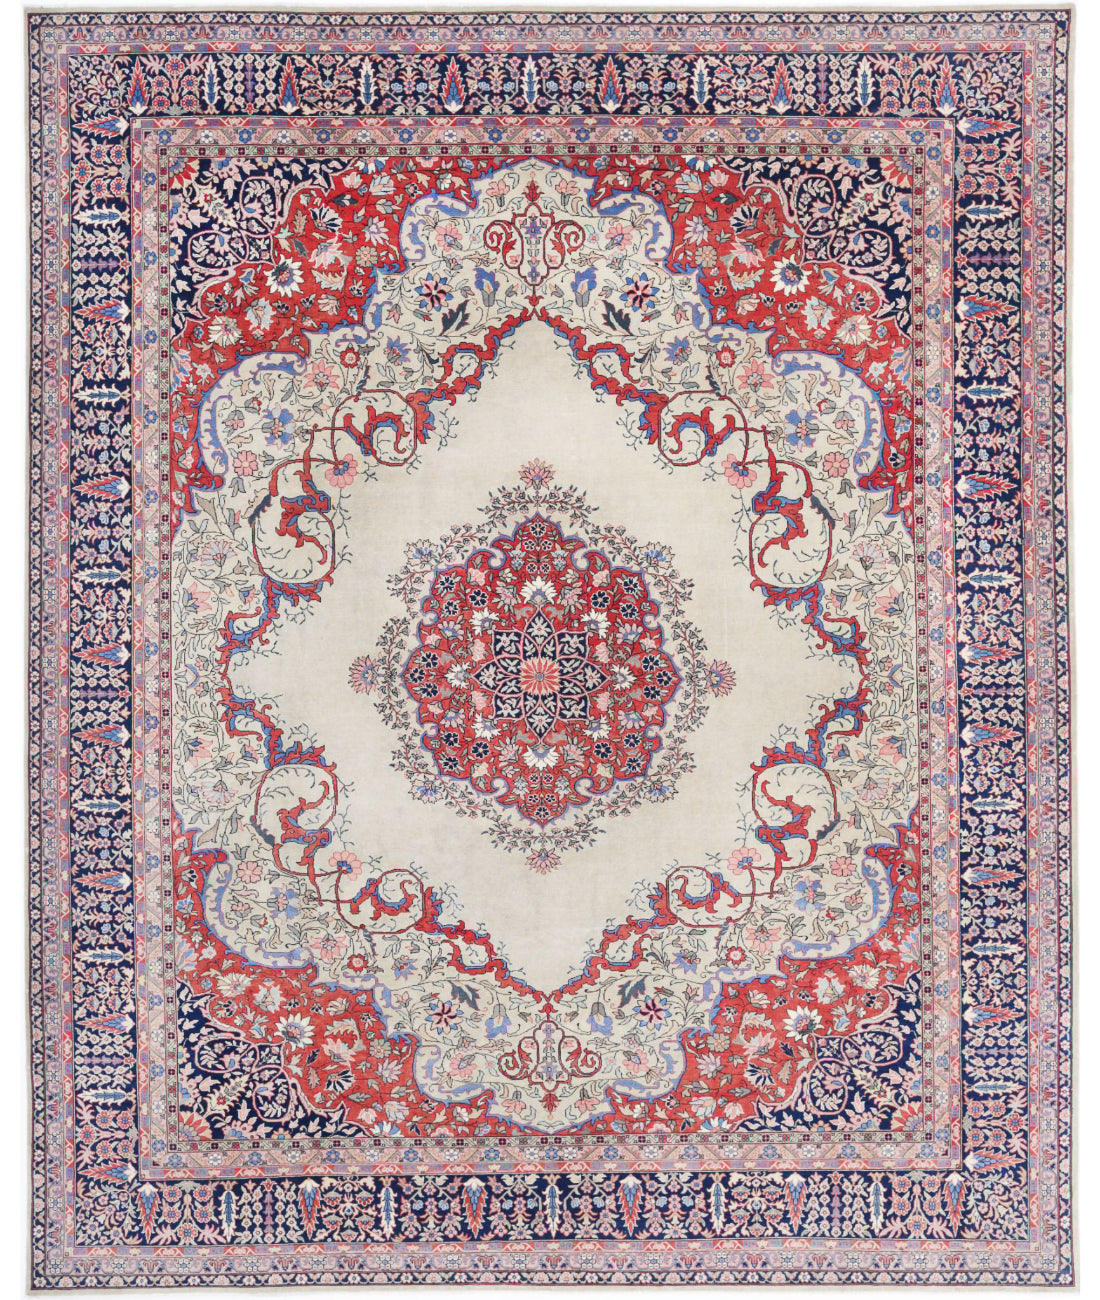 Hand Knotted Antique Persian Tabriz Wool Rug - 11'7'' x 14'5'' 11'7'' x 14'5'' (348 X 433) / Ivory / Blue